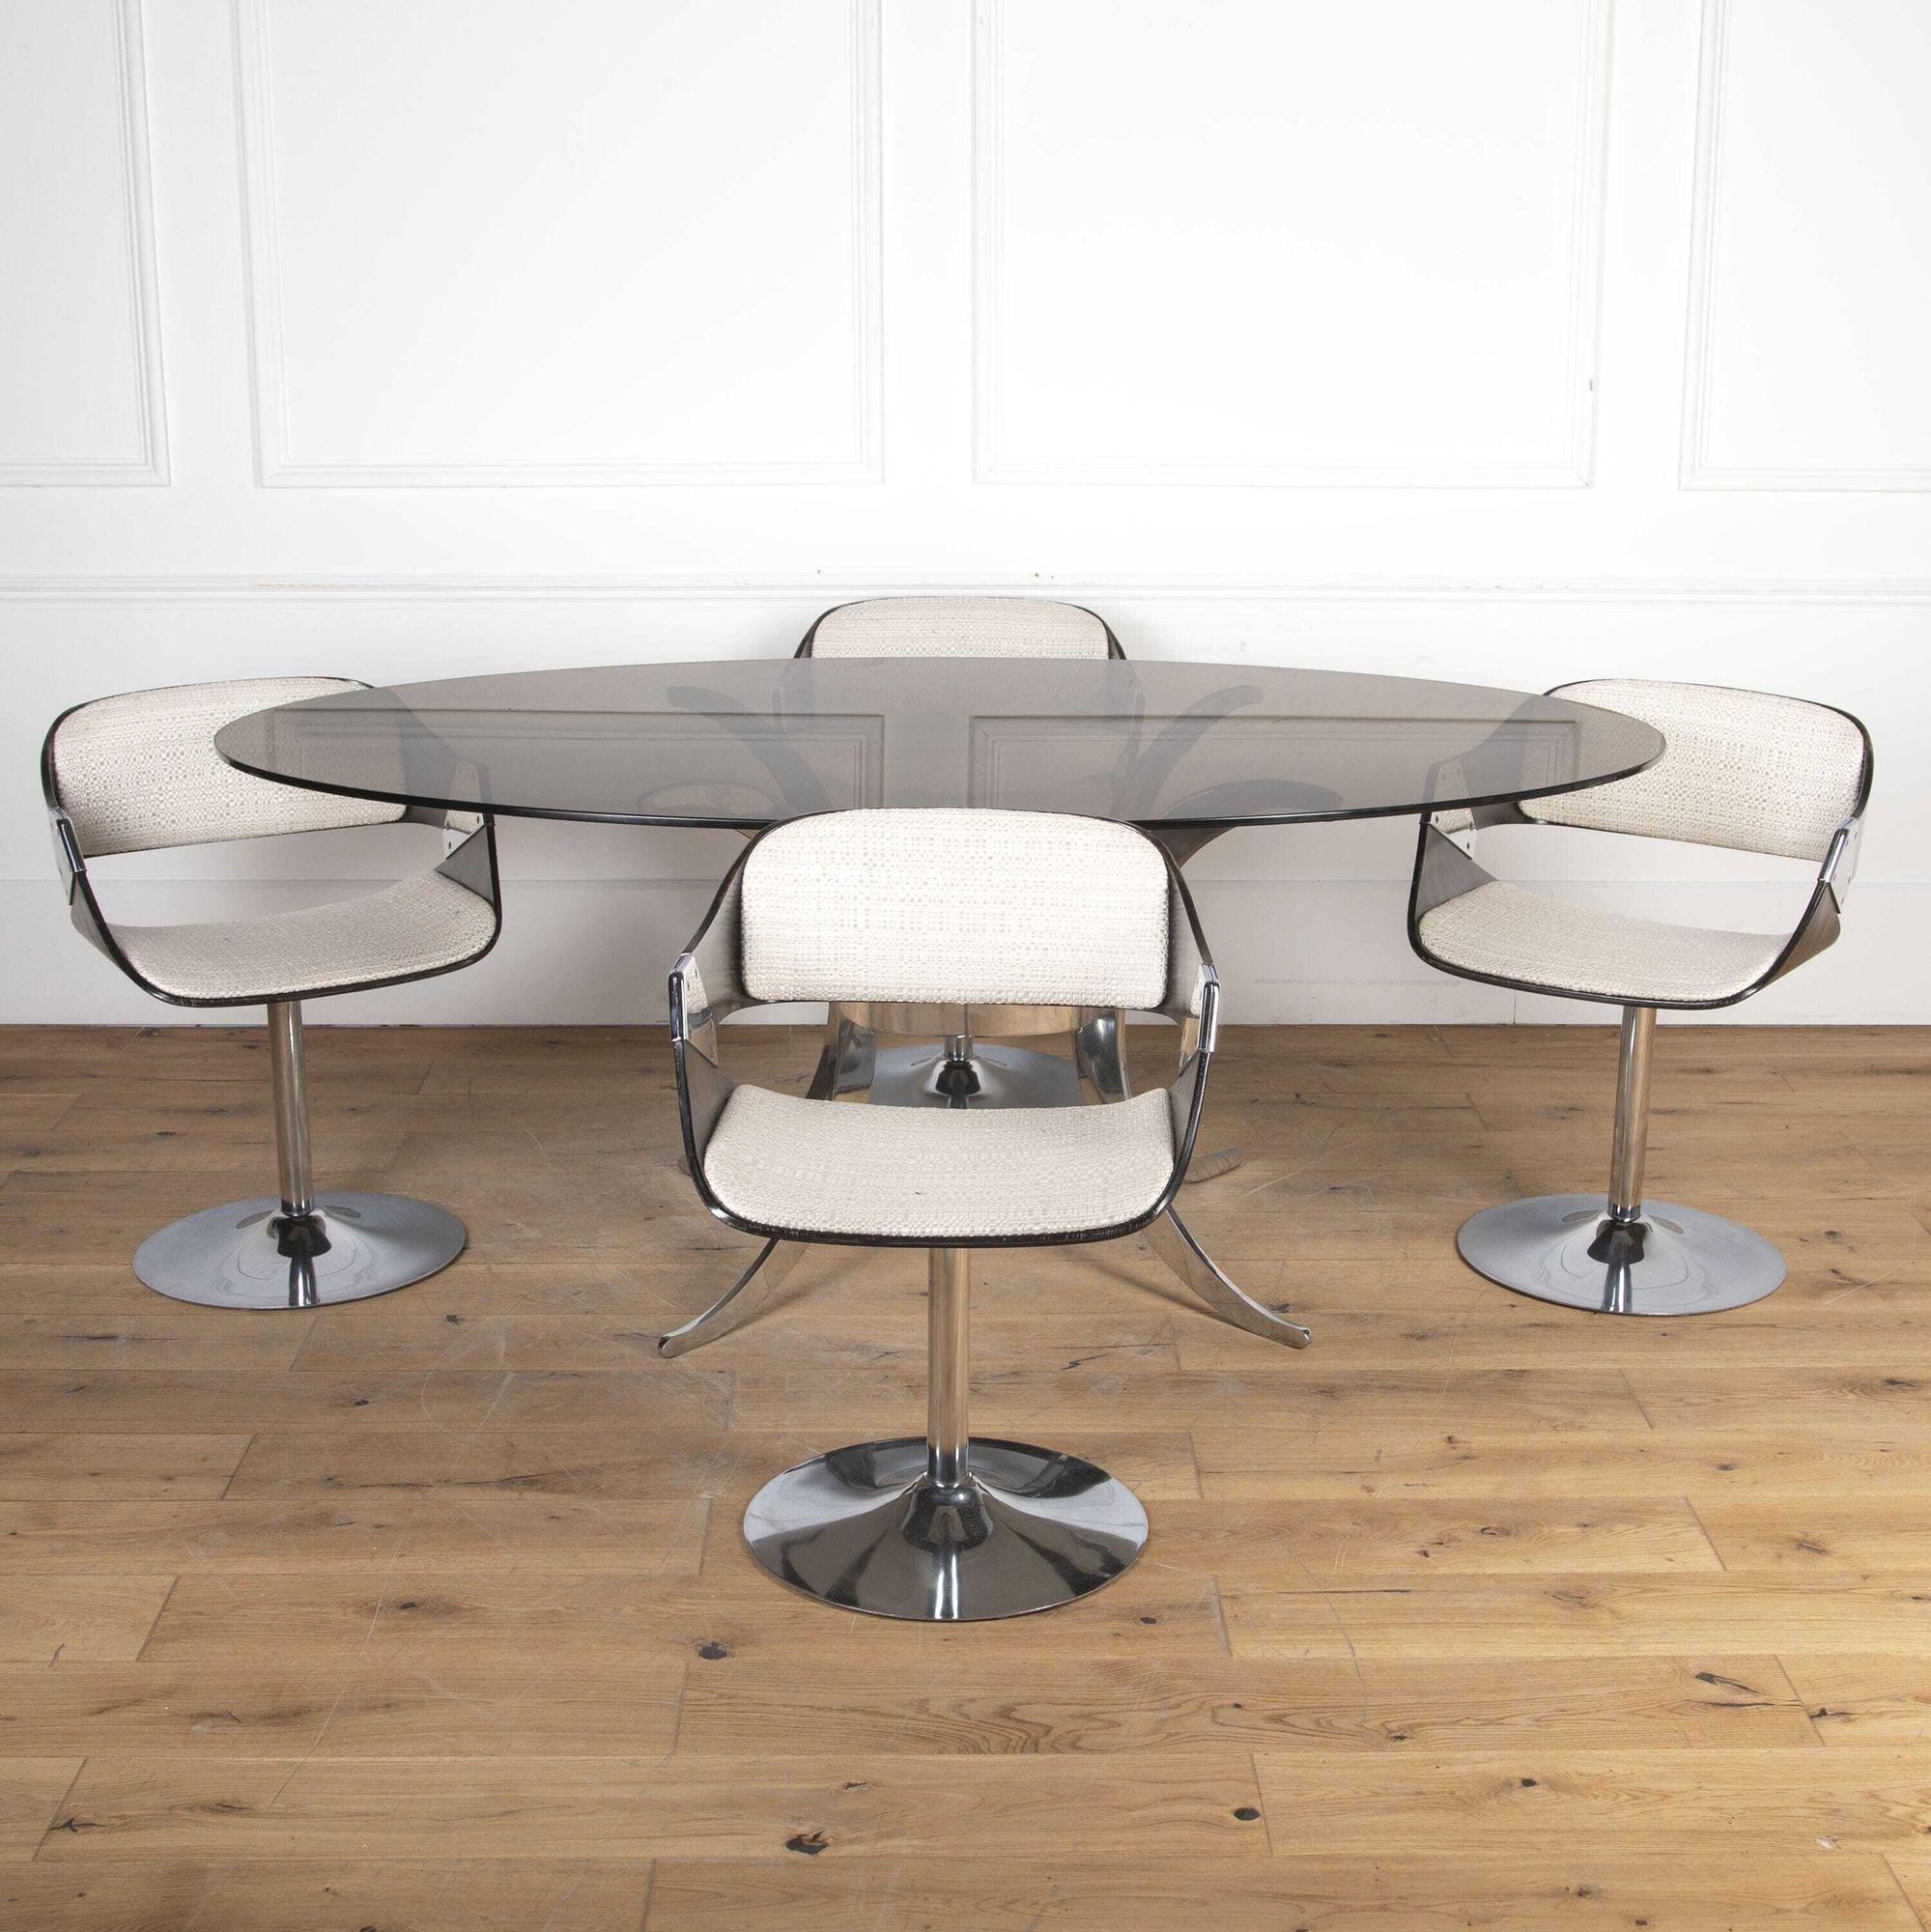 A wonderful Mid Century dining table and chairs made by Roche-Bobois.
The table has a chrome base with a smoked glass oval top.
The chairs have a swivel chrome base with upholstered seating and steam-bent ply backs.
Purchased in 1973 complete